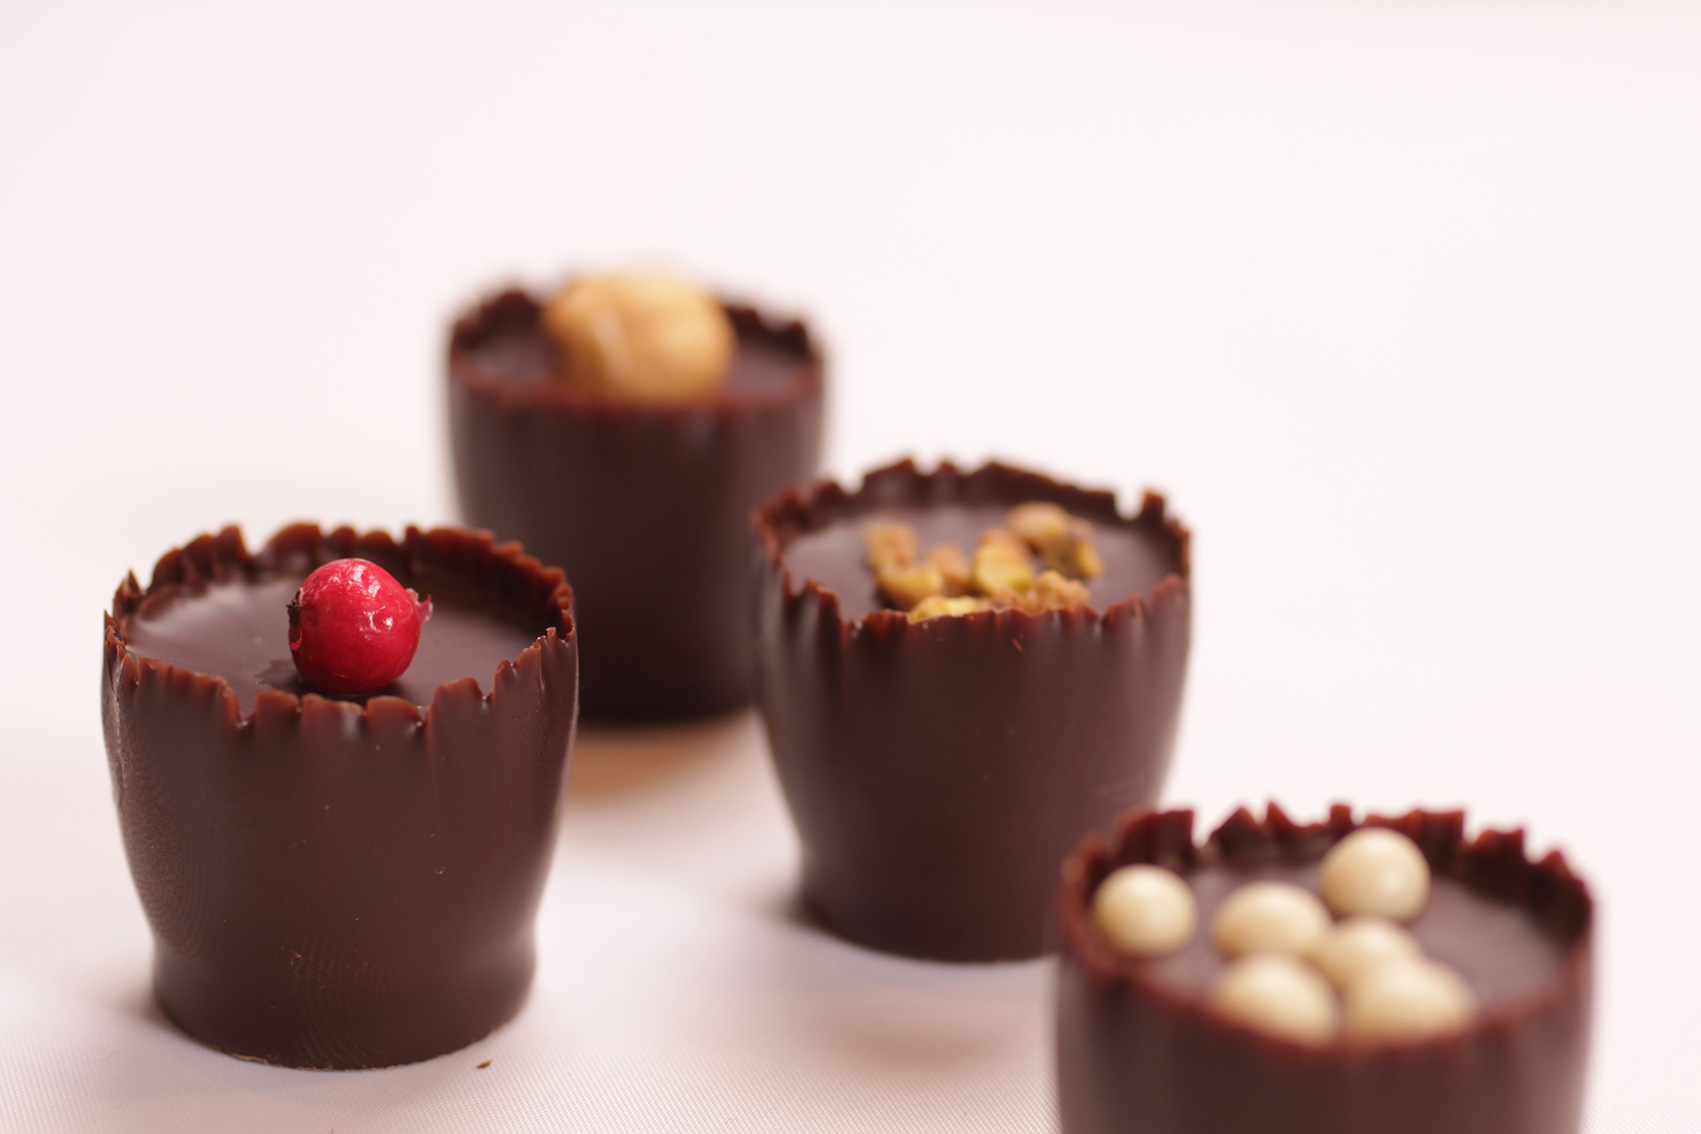 CHOCOLATE CUP PRALINE IN 4PC GIFT BOX